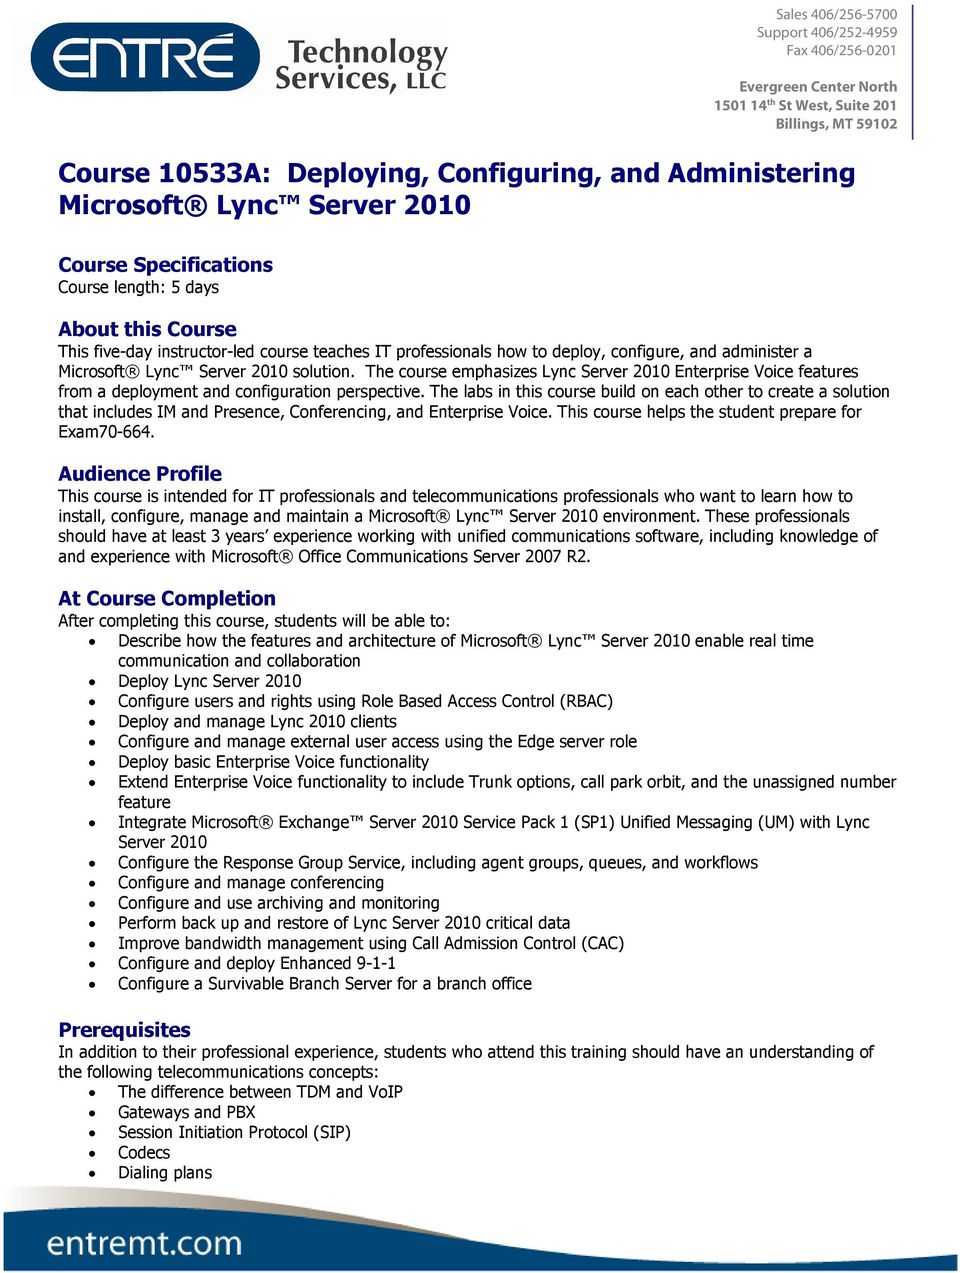 Server 2010 solution. The course emphasizes Lync Server 2010 Enterprise Voice features from a deployment and configuration perspective.